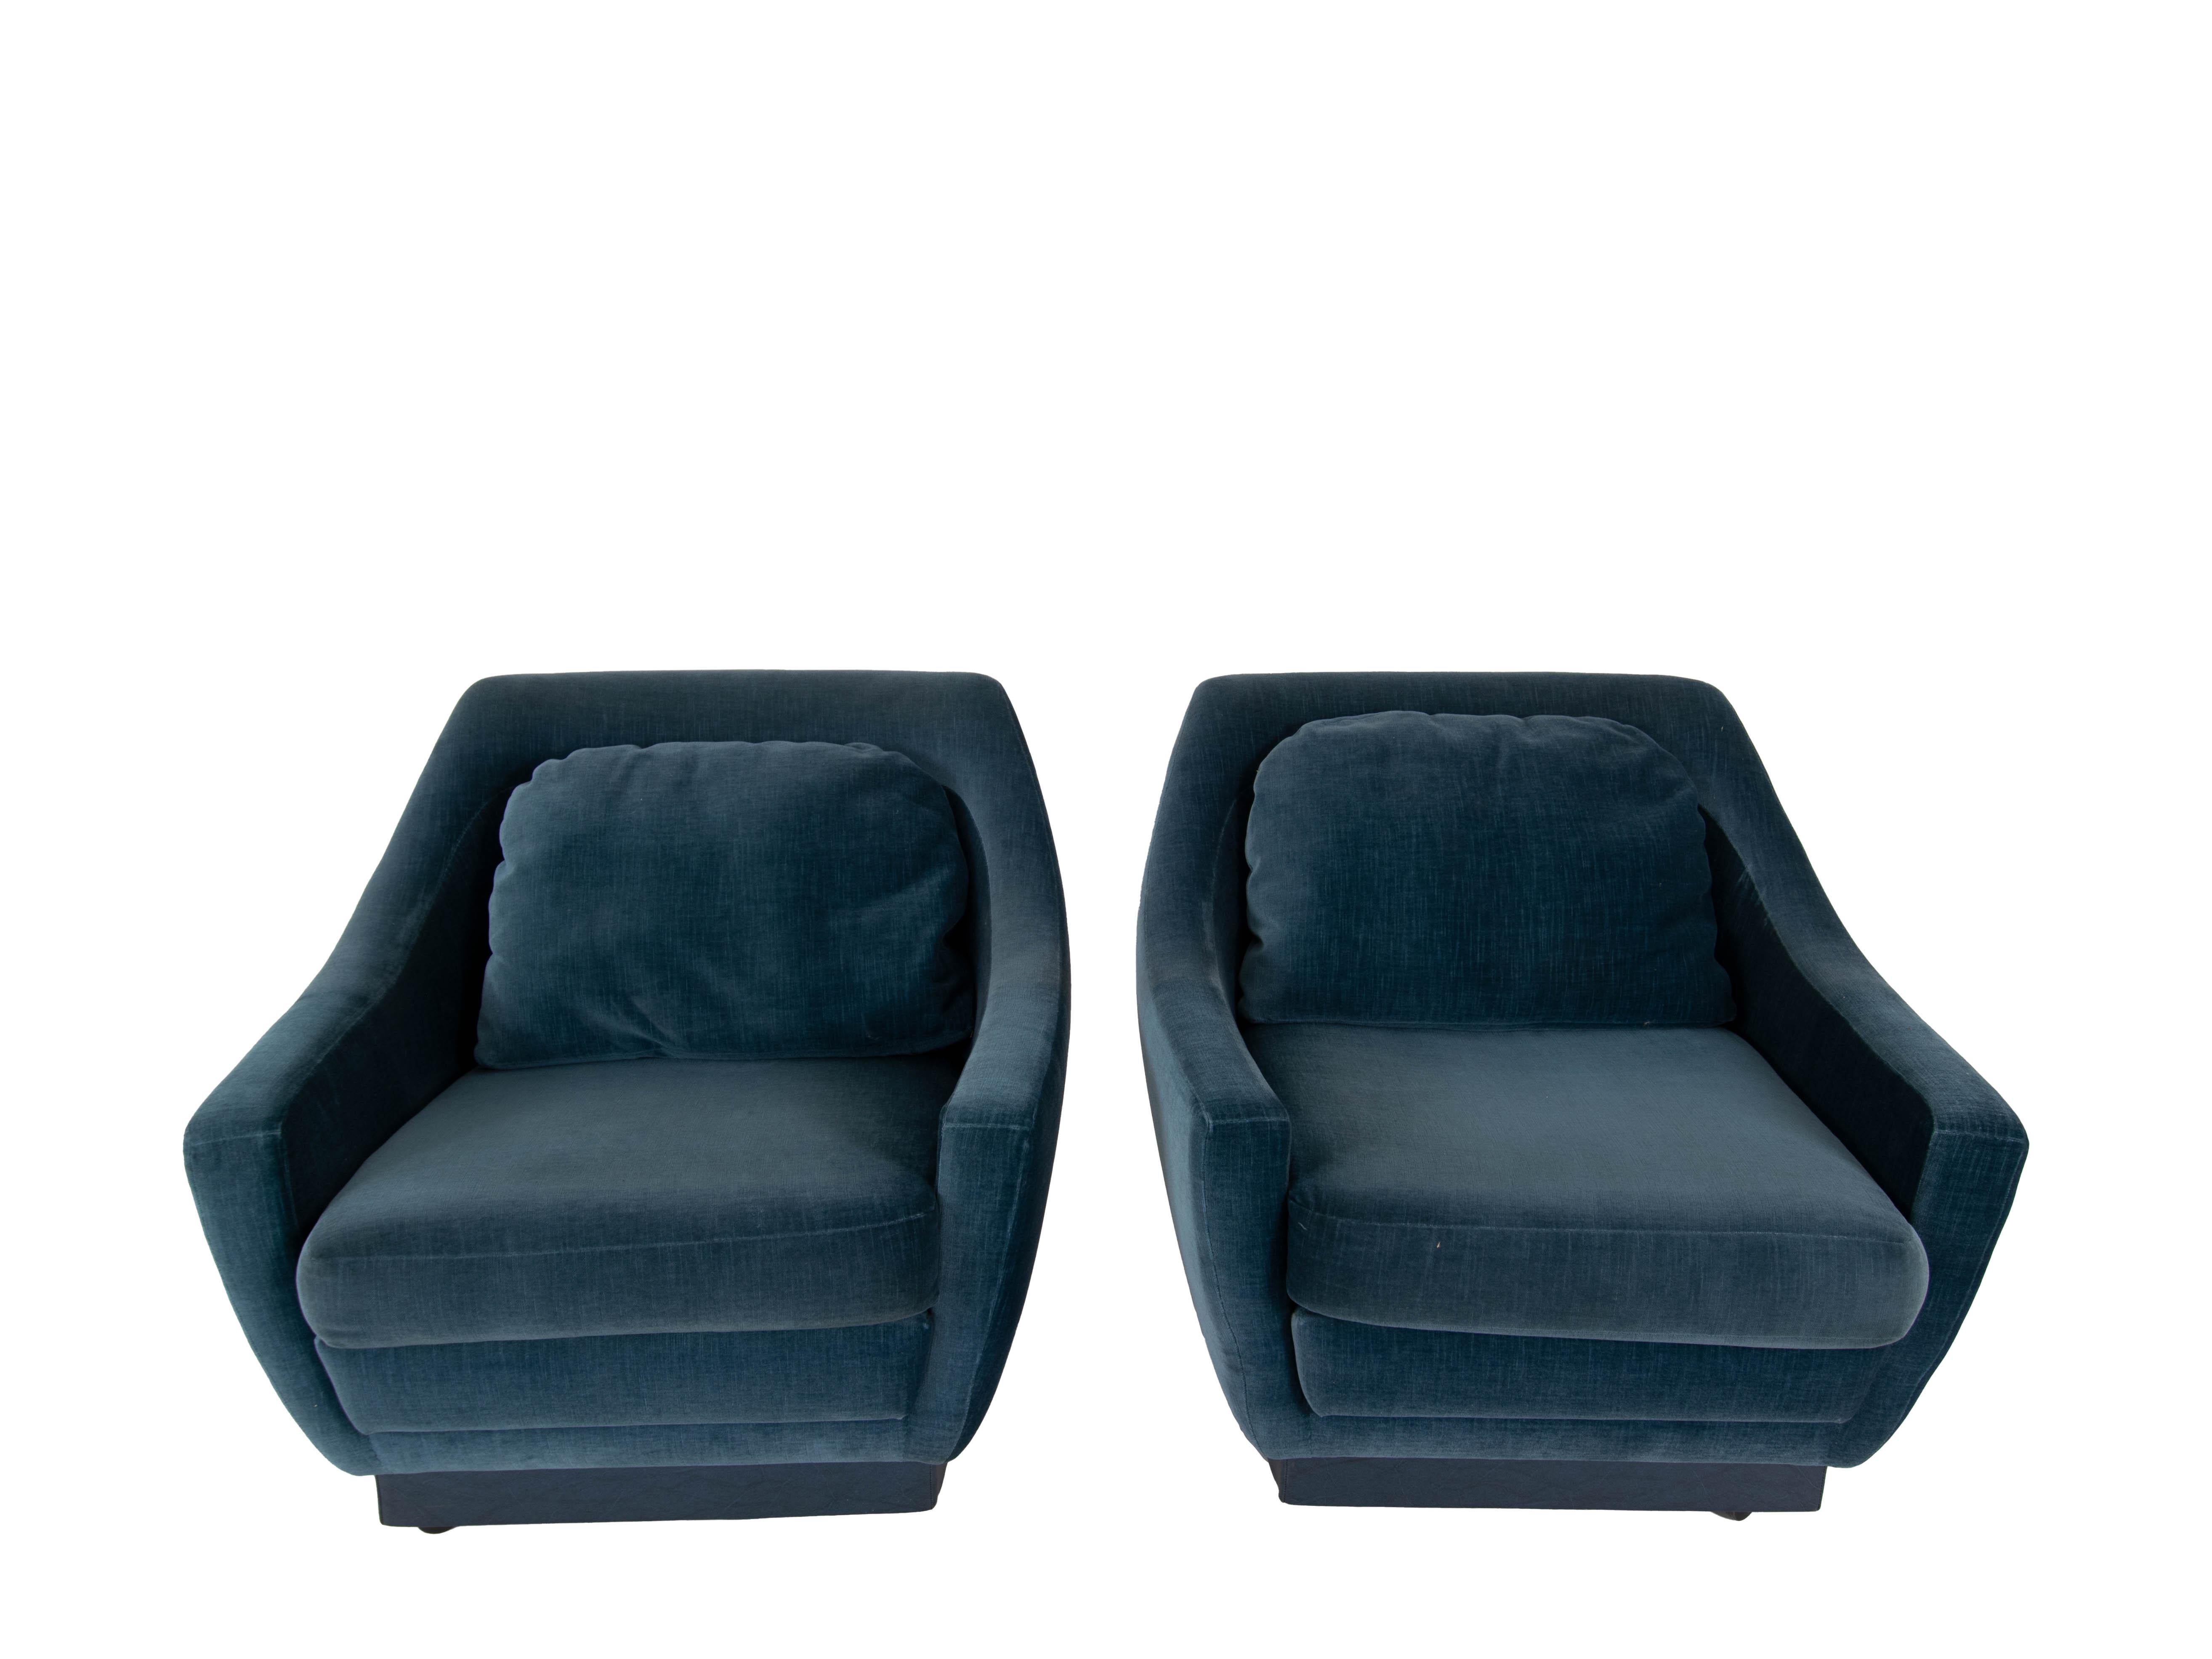 Leather Set of Art Deco Style Lounge Chairs in Blue Velvet, the Netherlands